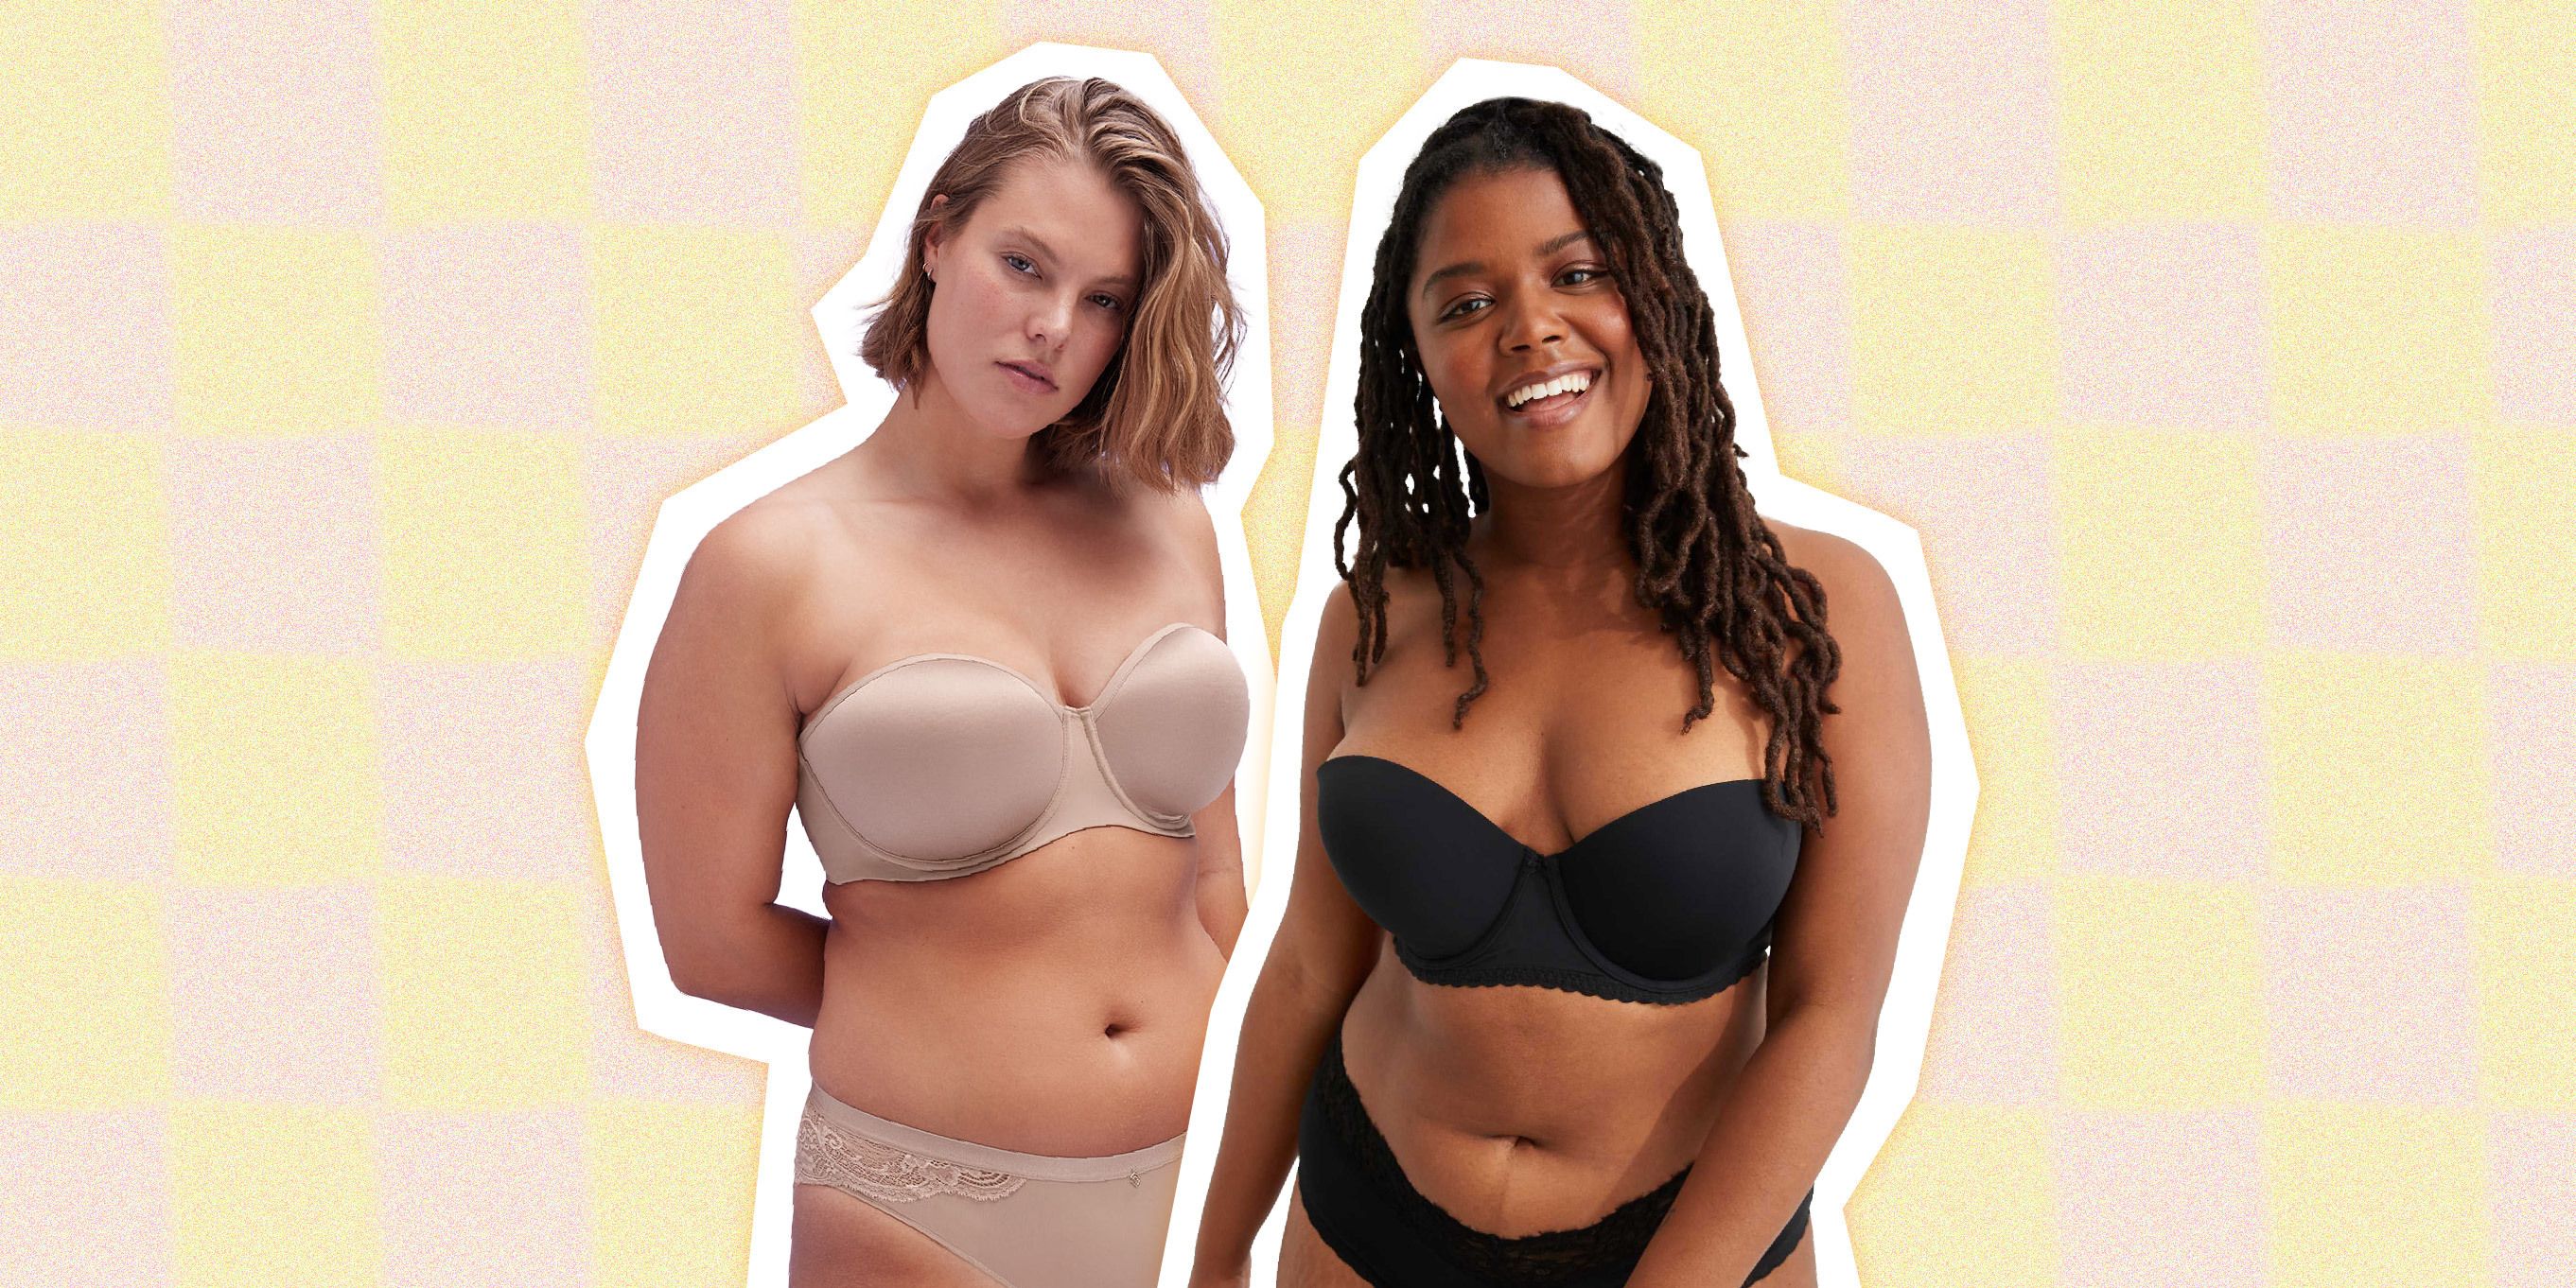 19 Best Strapless Bras For Any Bust Size – Comfortable, 42% OFF